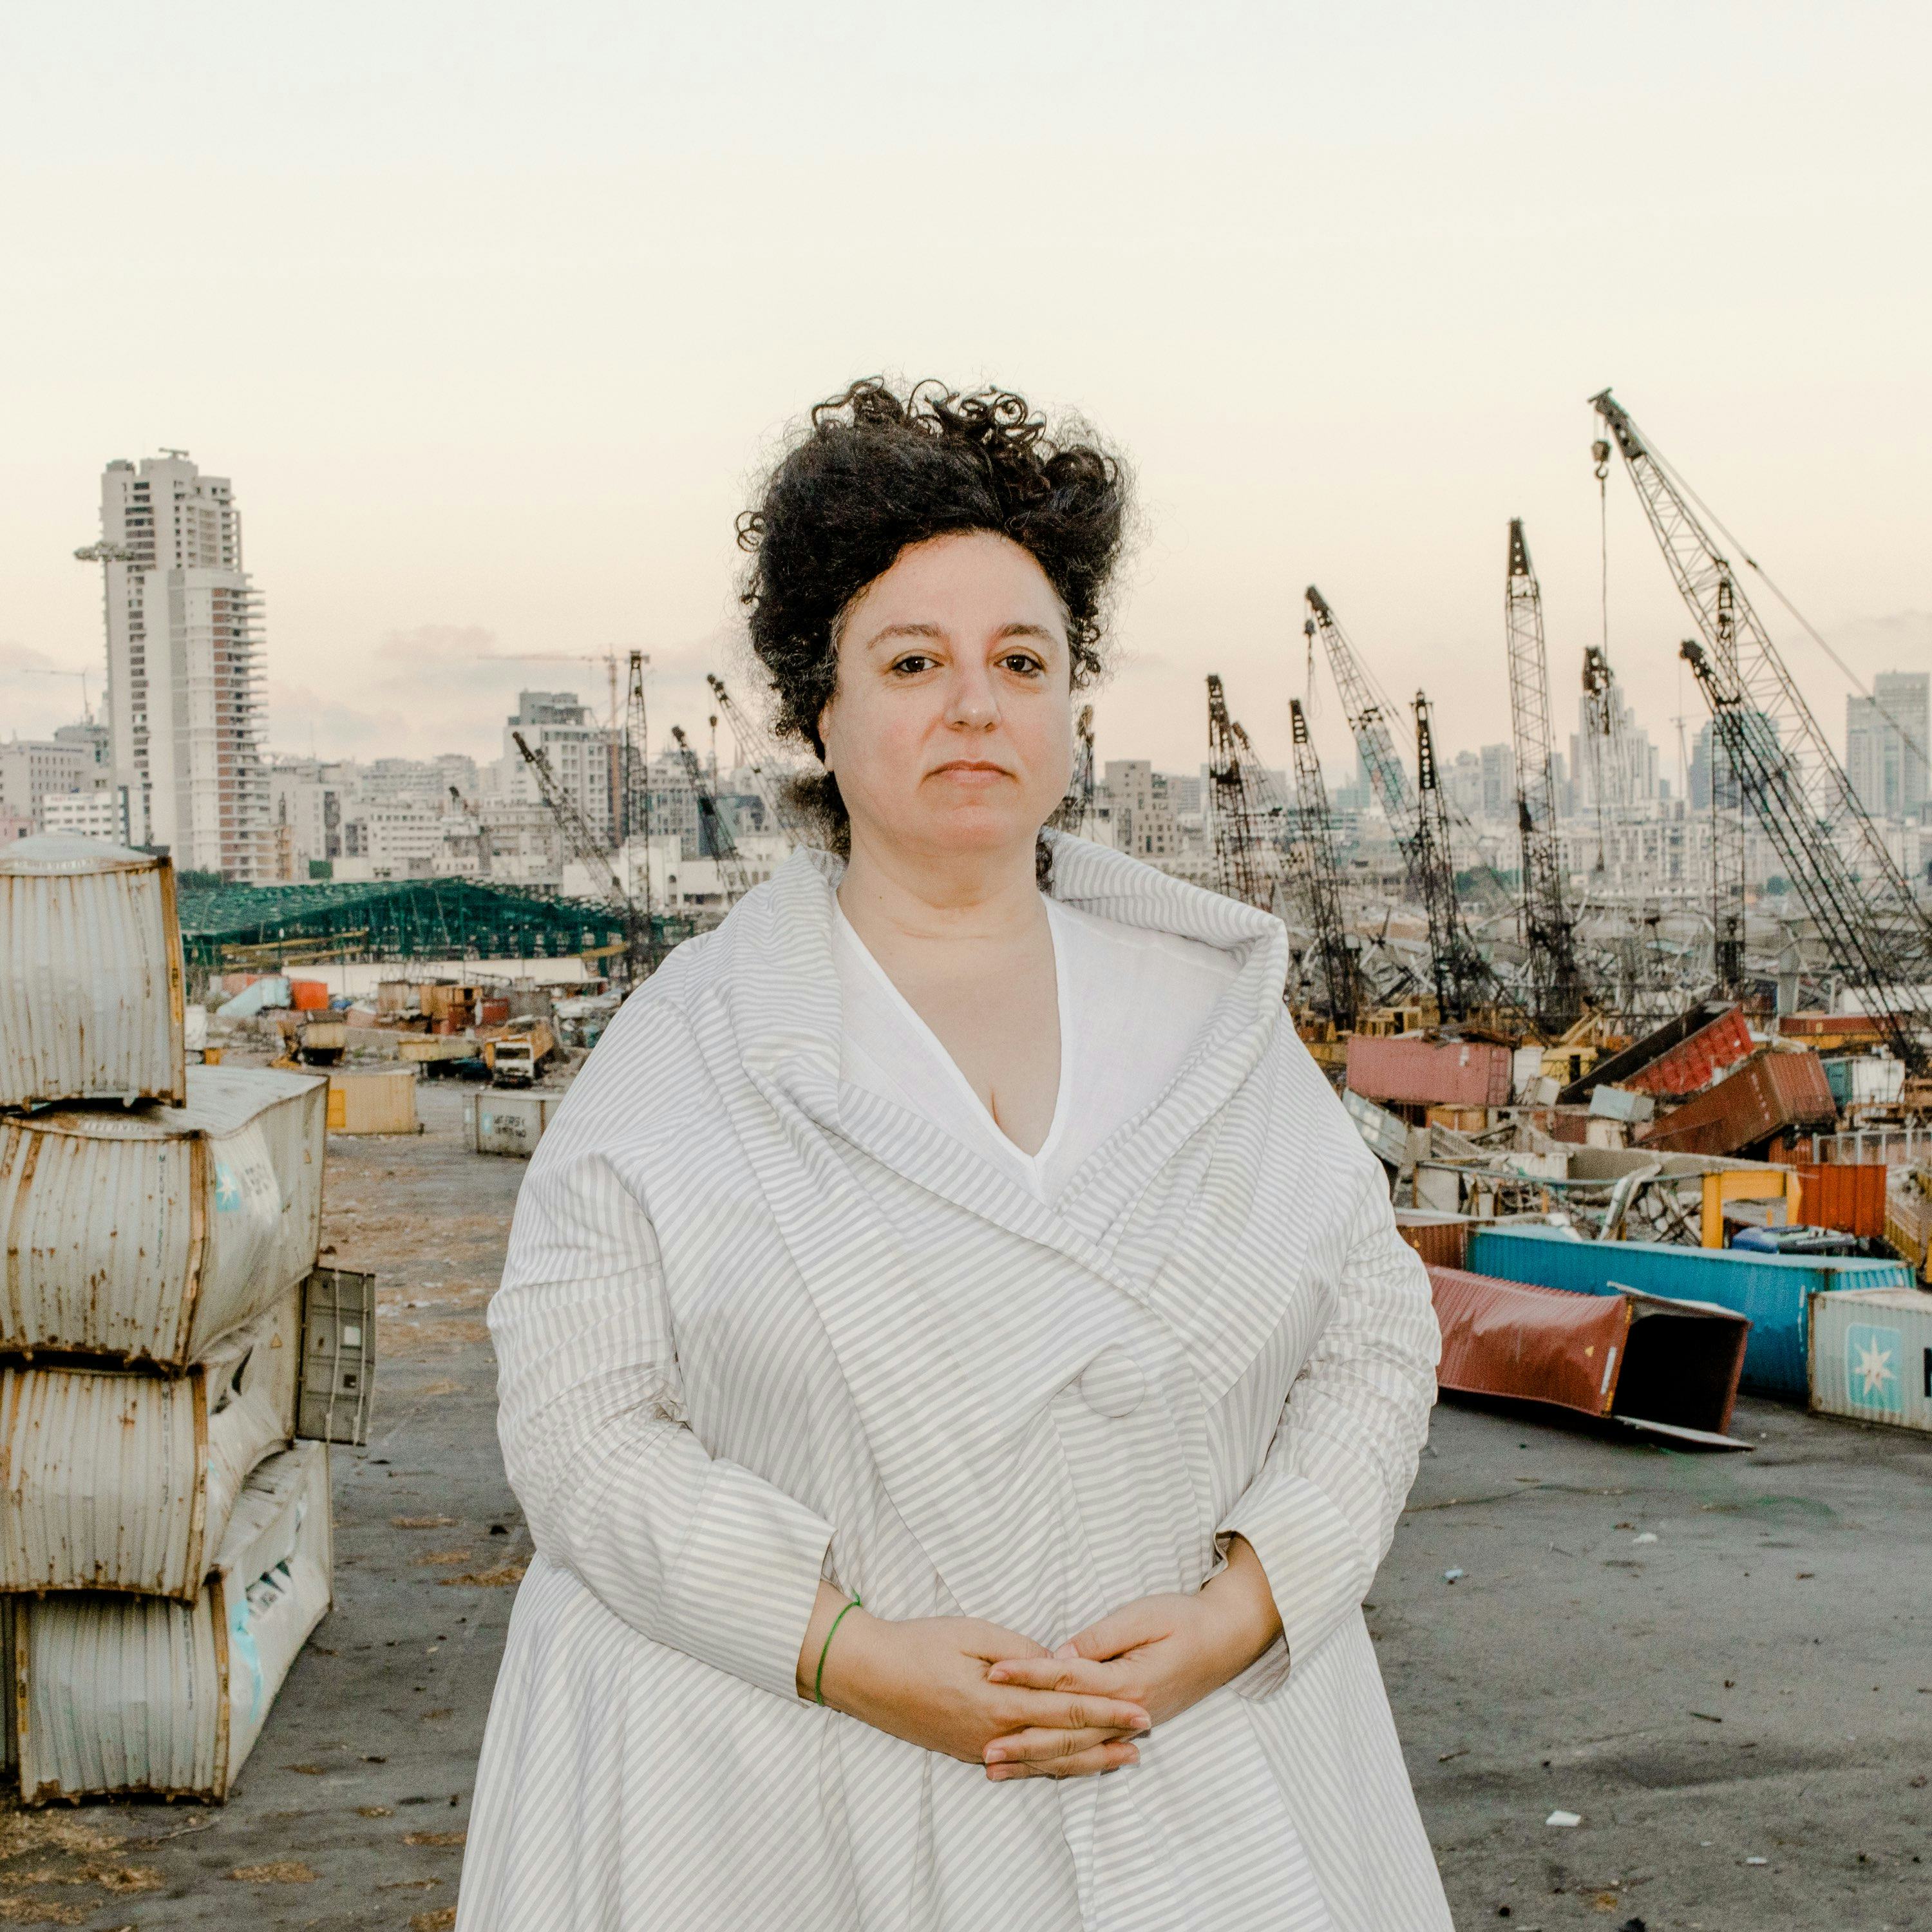 Portrait of a lady in the harbour in Beirut, Lebanon